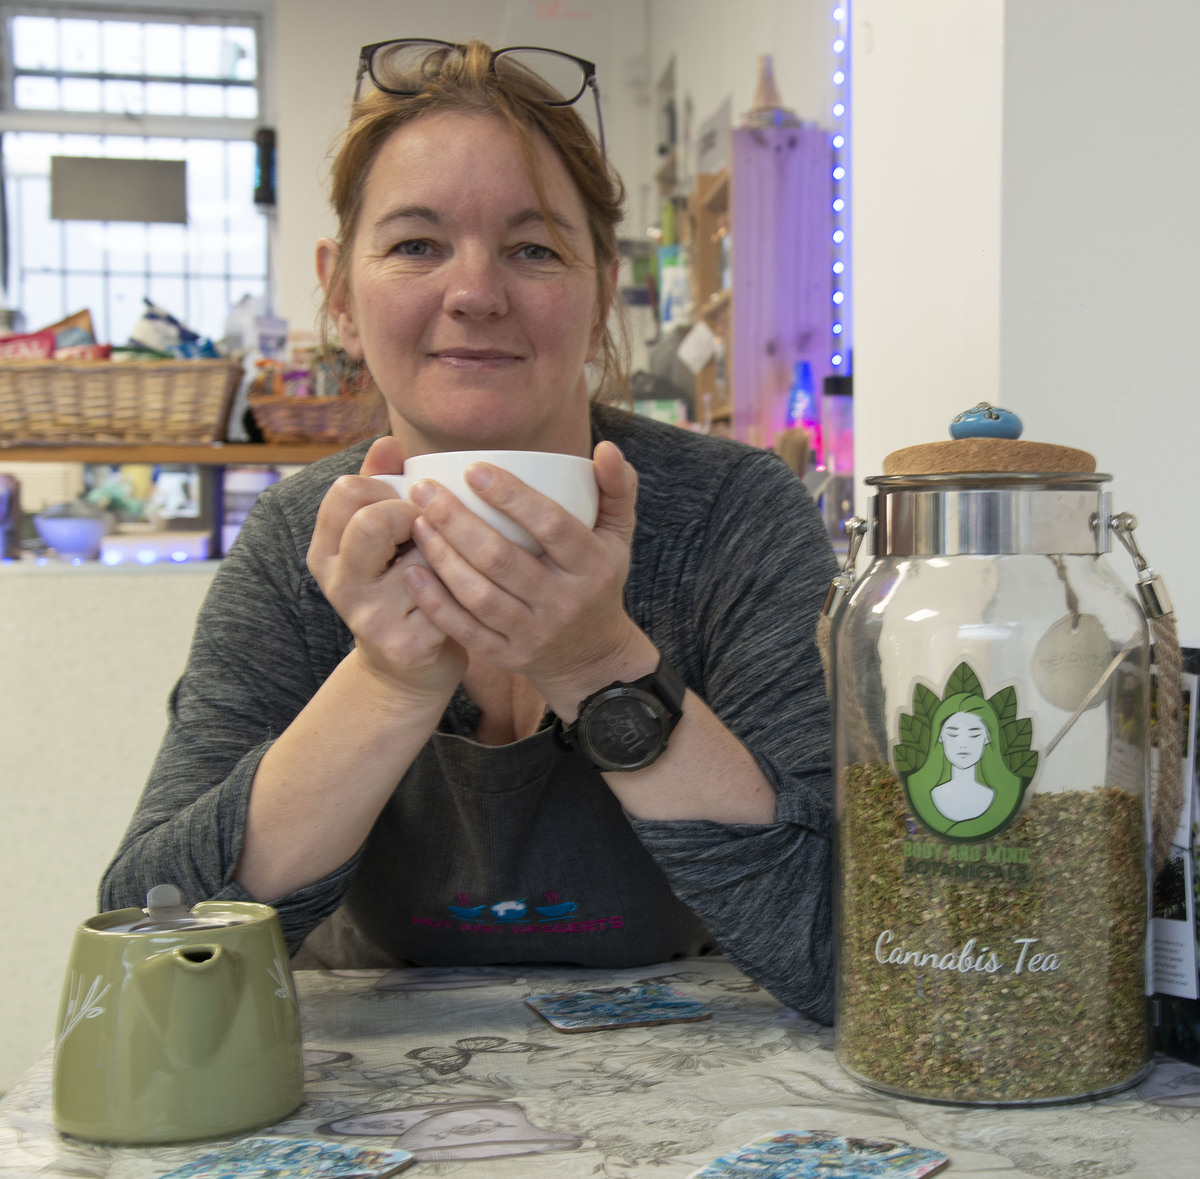 Cannabis tea is highly popular in Fort William